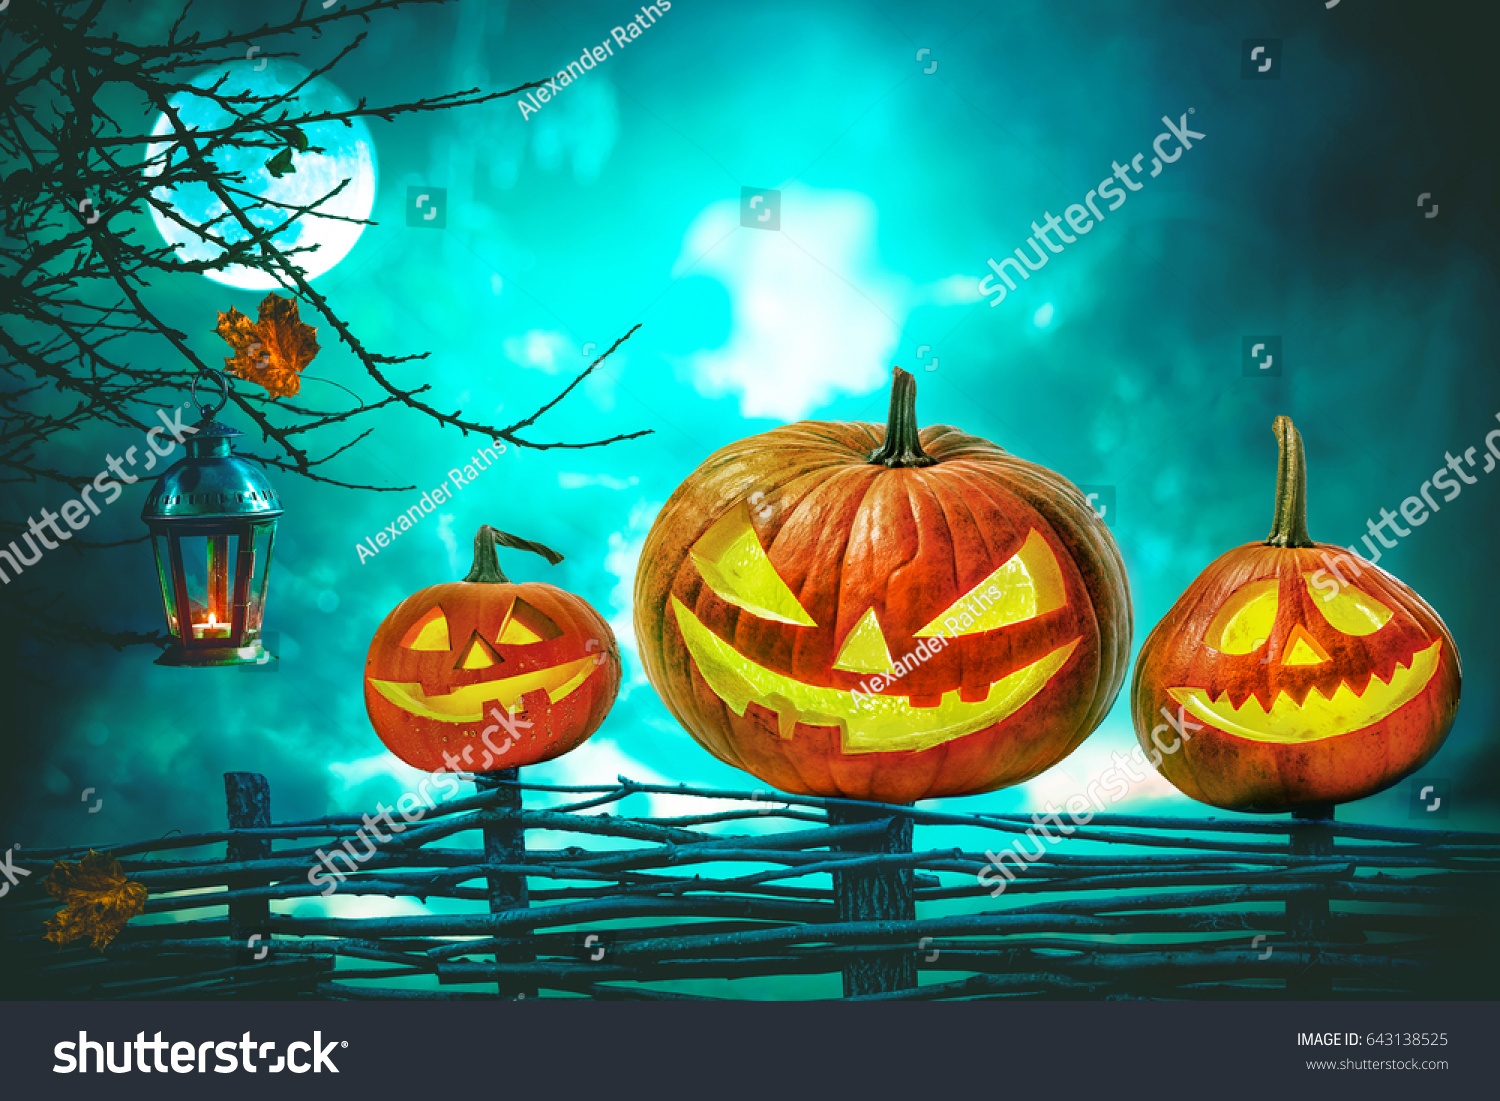 Halloween pumpkins in front of nightly spooky forest background #643138525